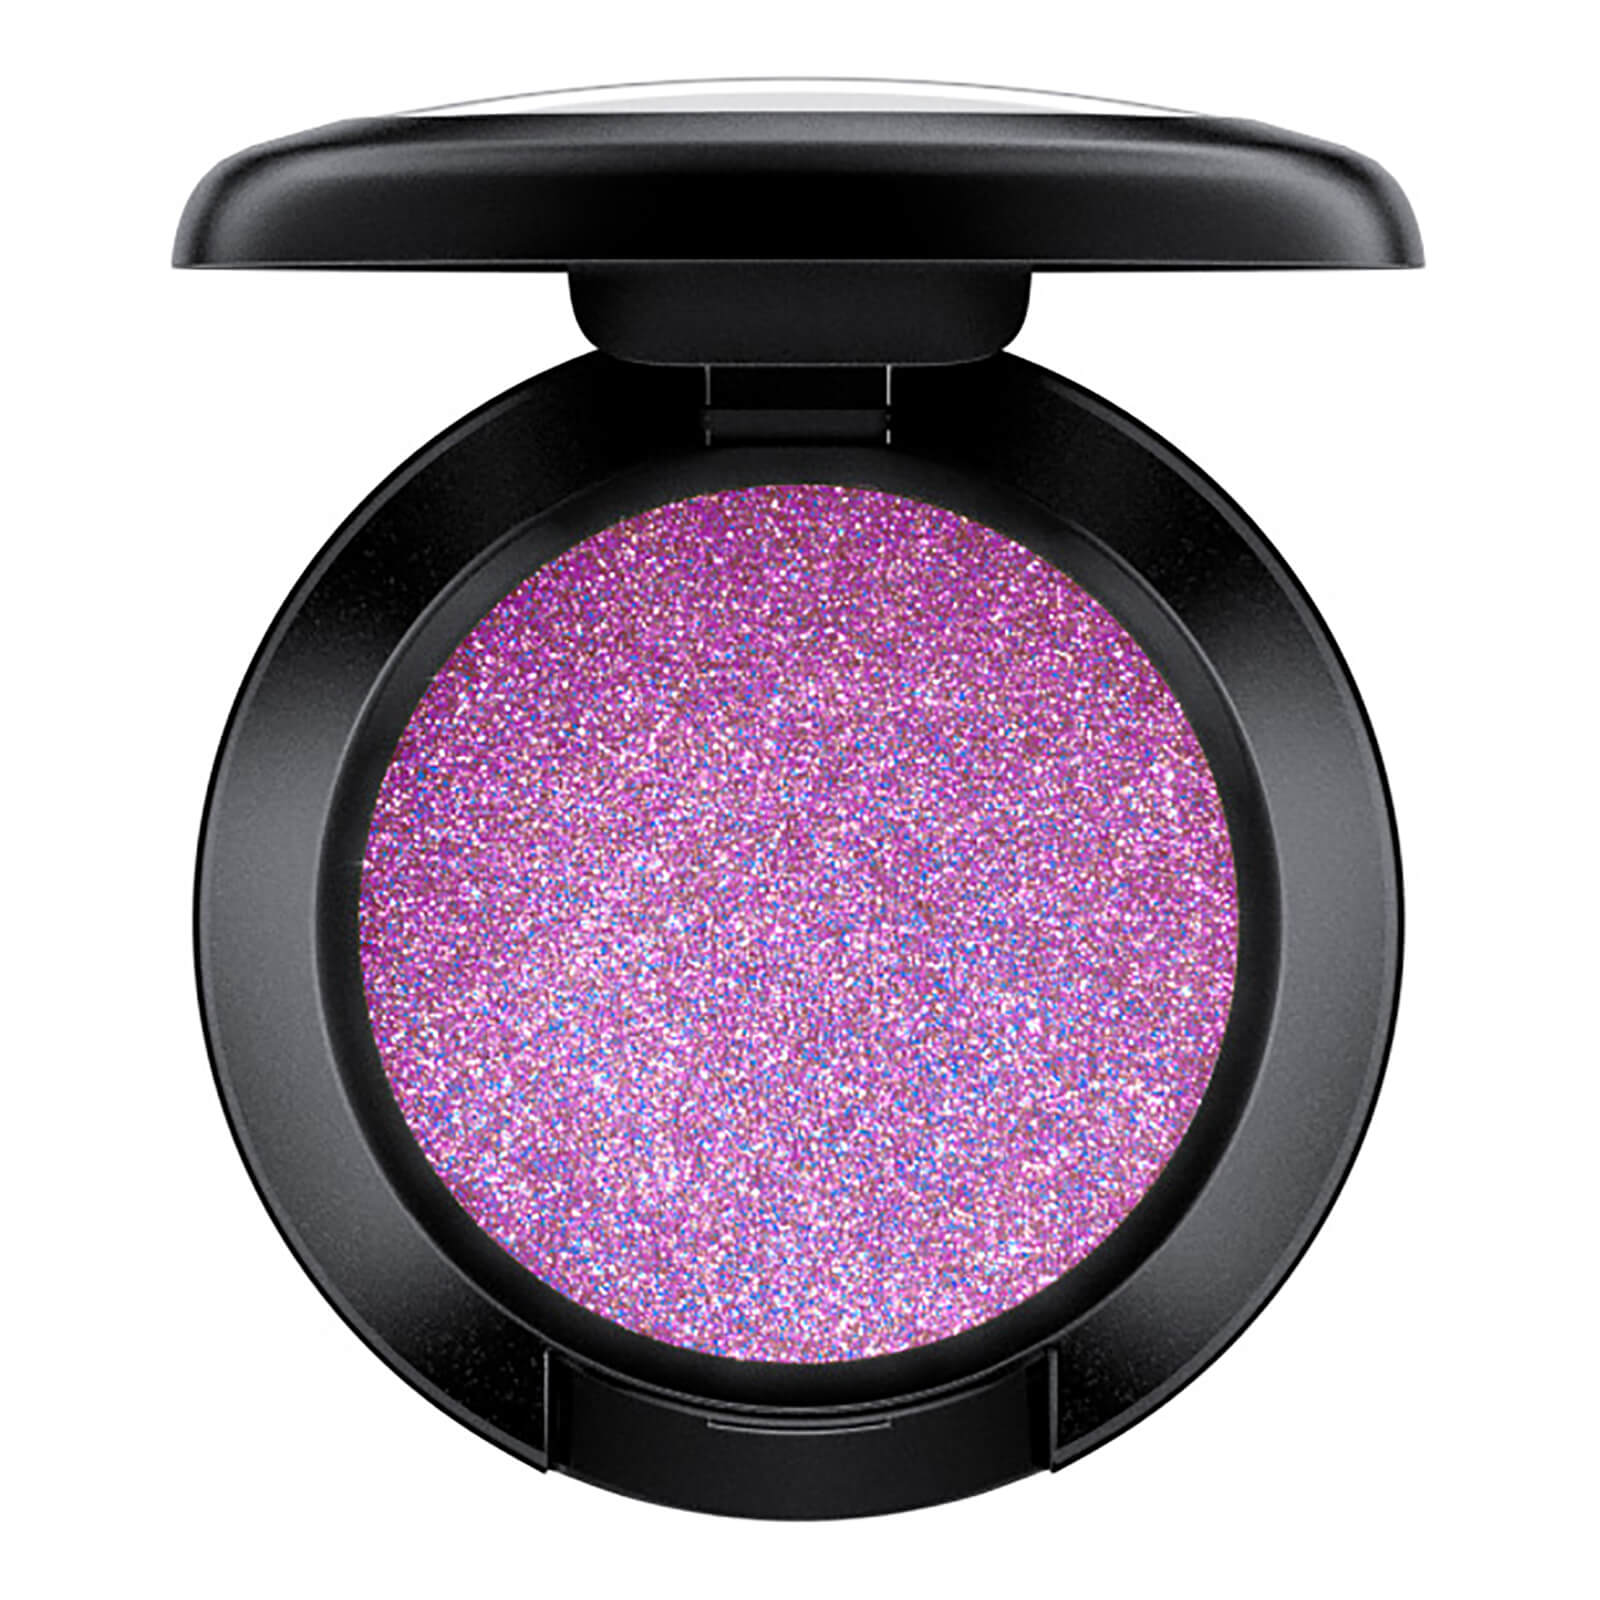 MAC Pop Dazzleshadow Eye Shadow (Various Shades) - Can't Stop Don't Stop